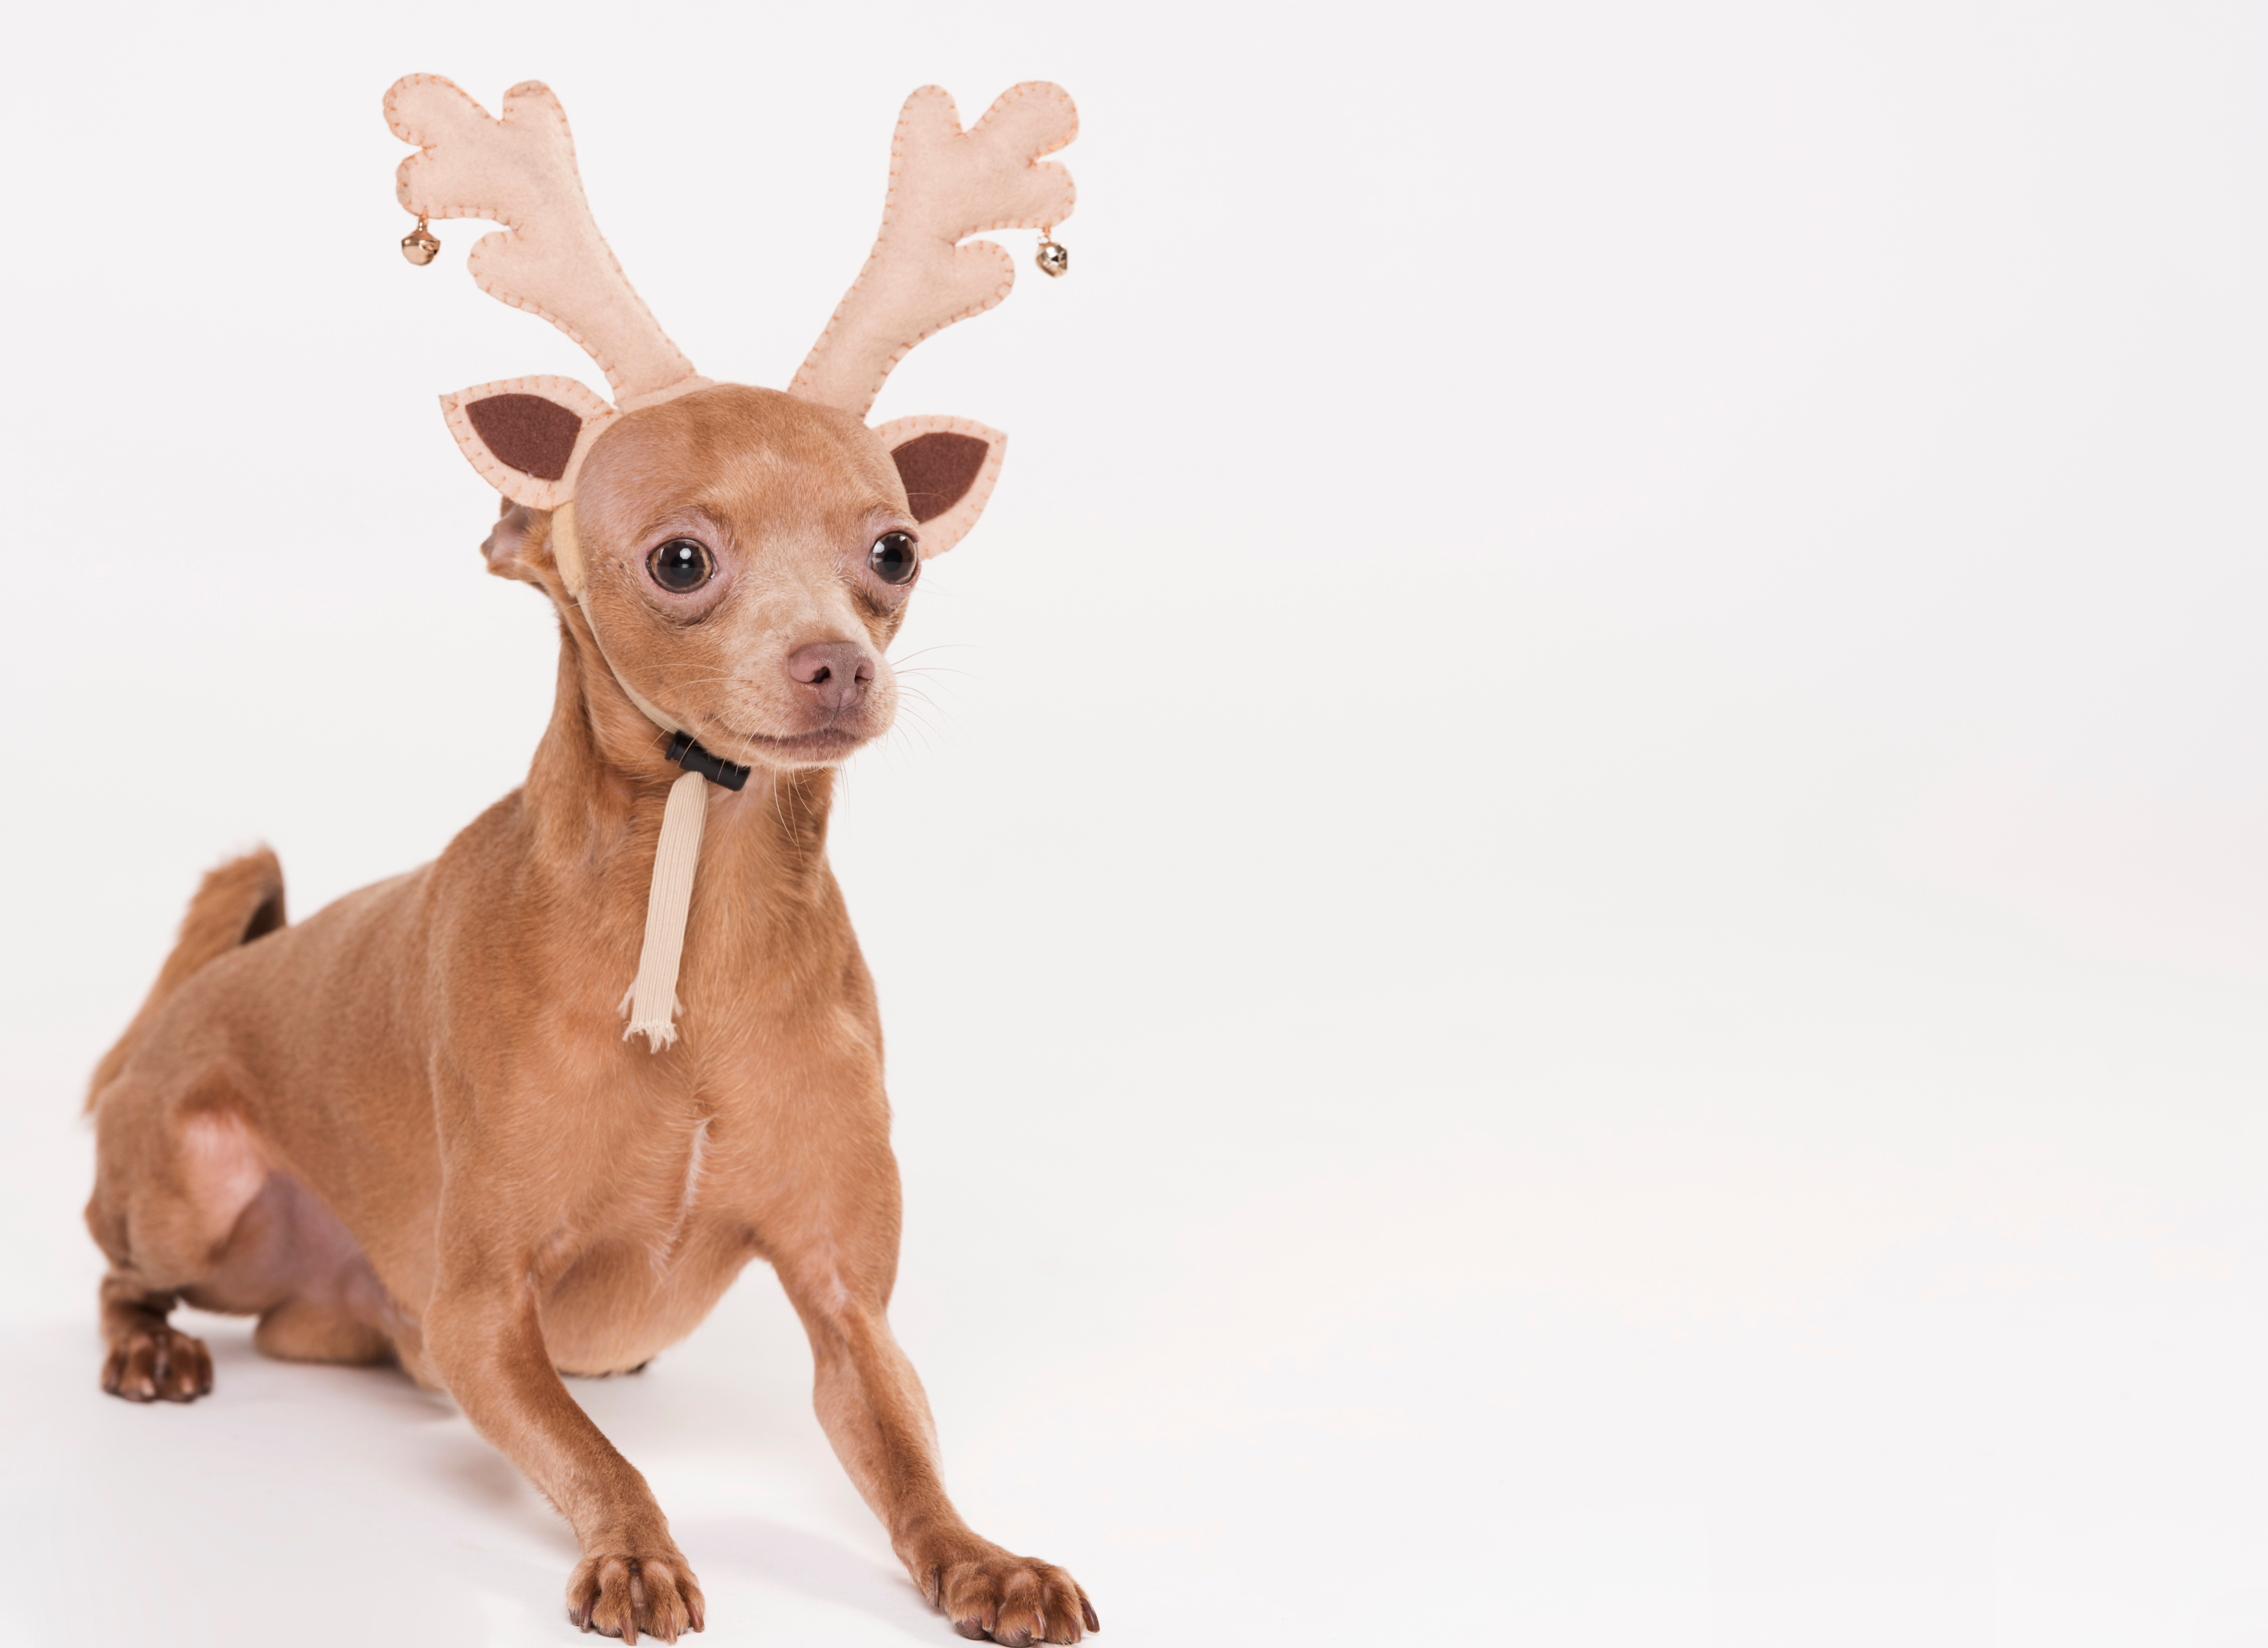 How To Prepare Deer Antlers For Dogs